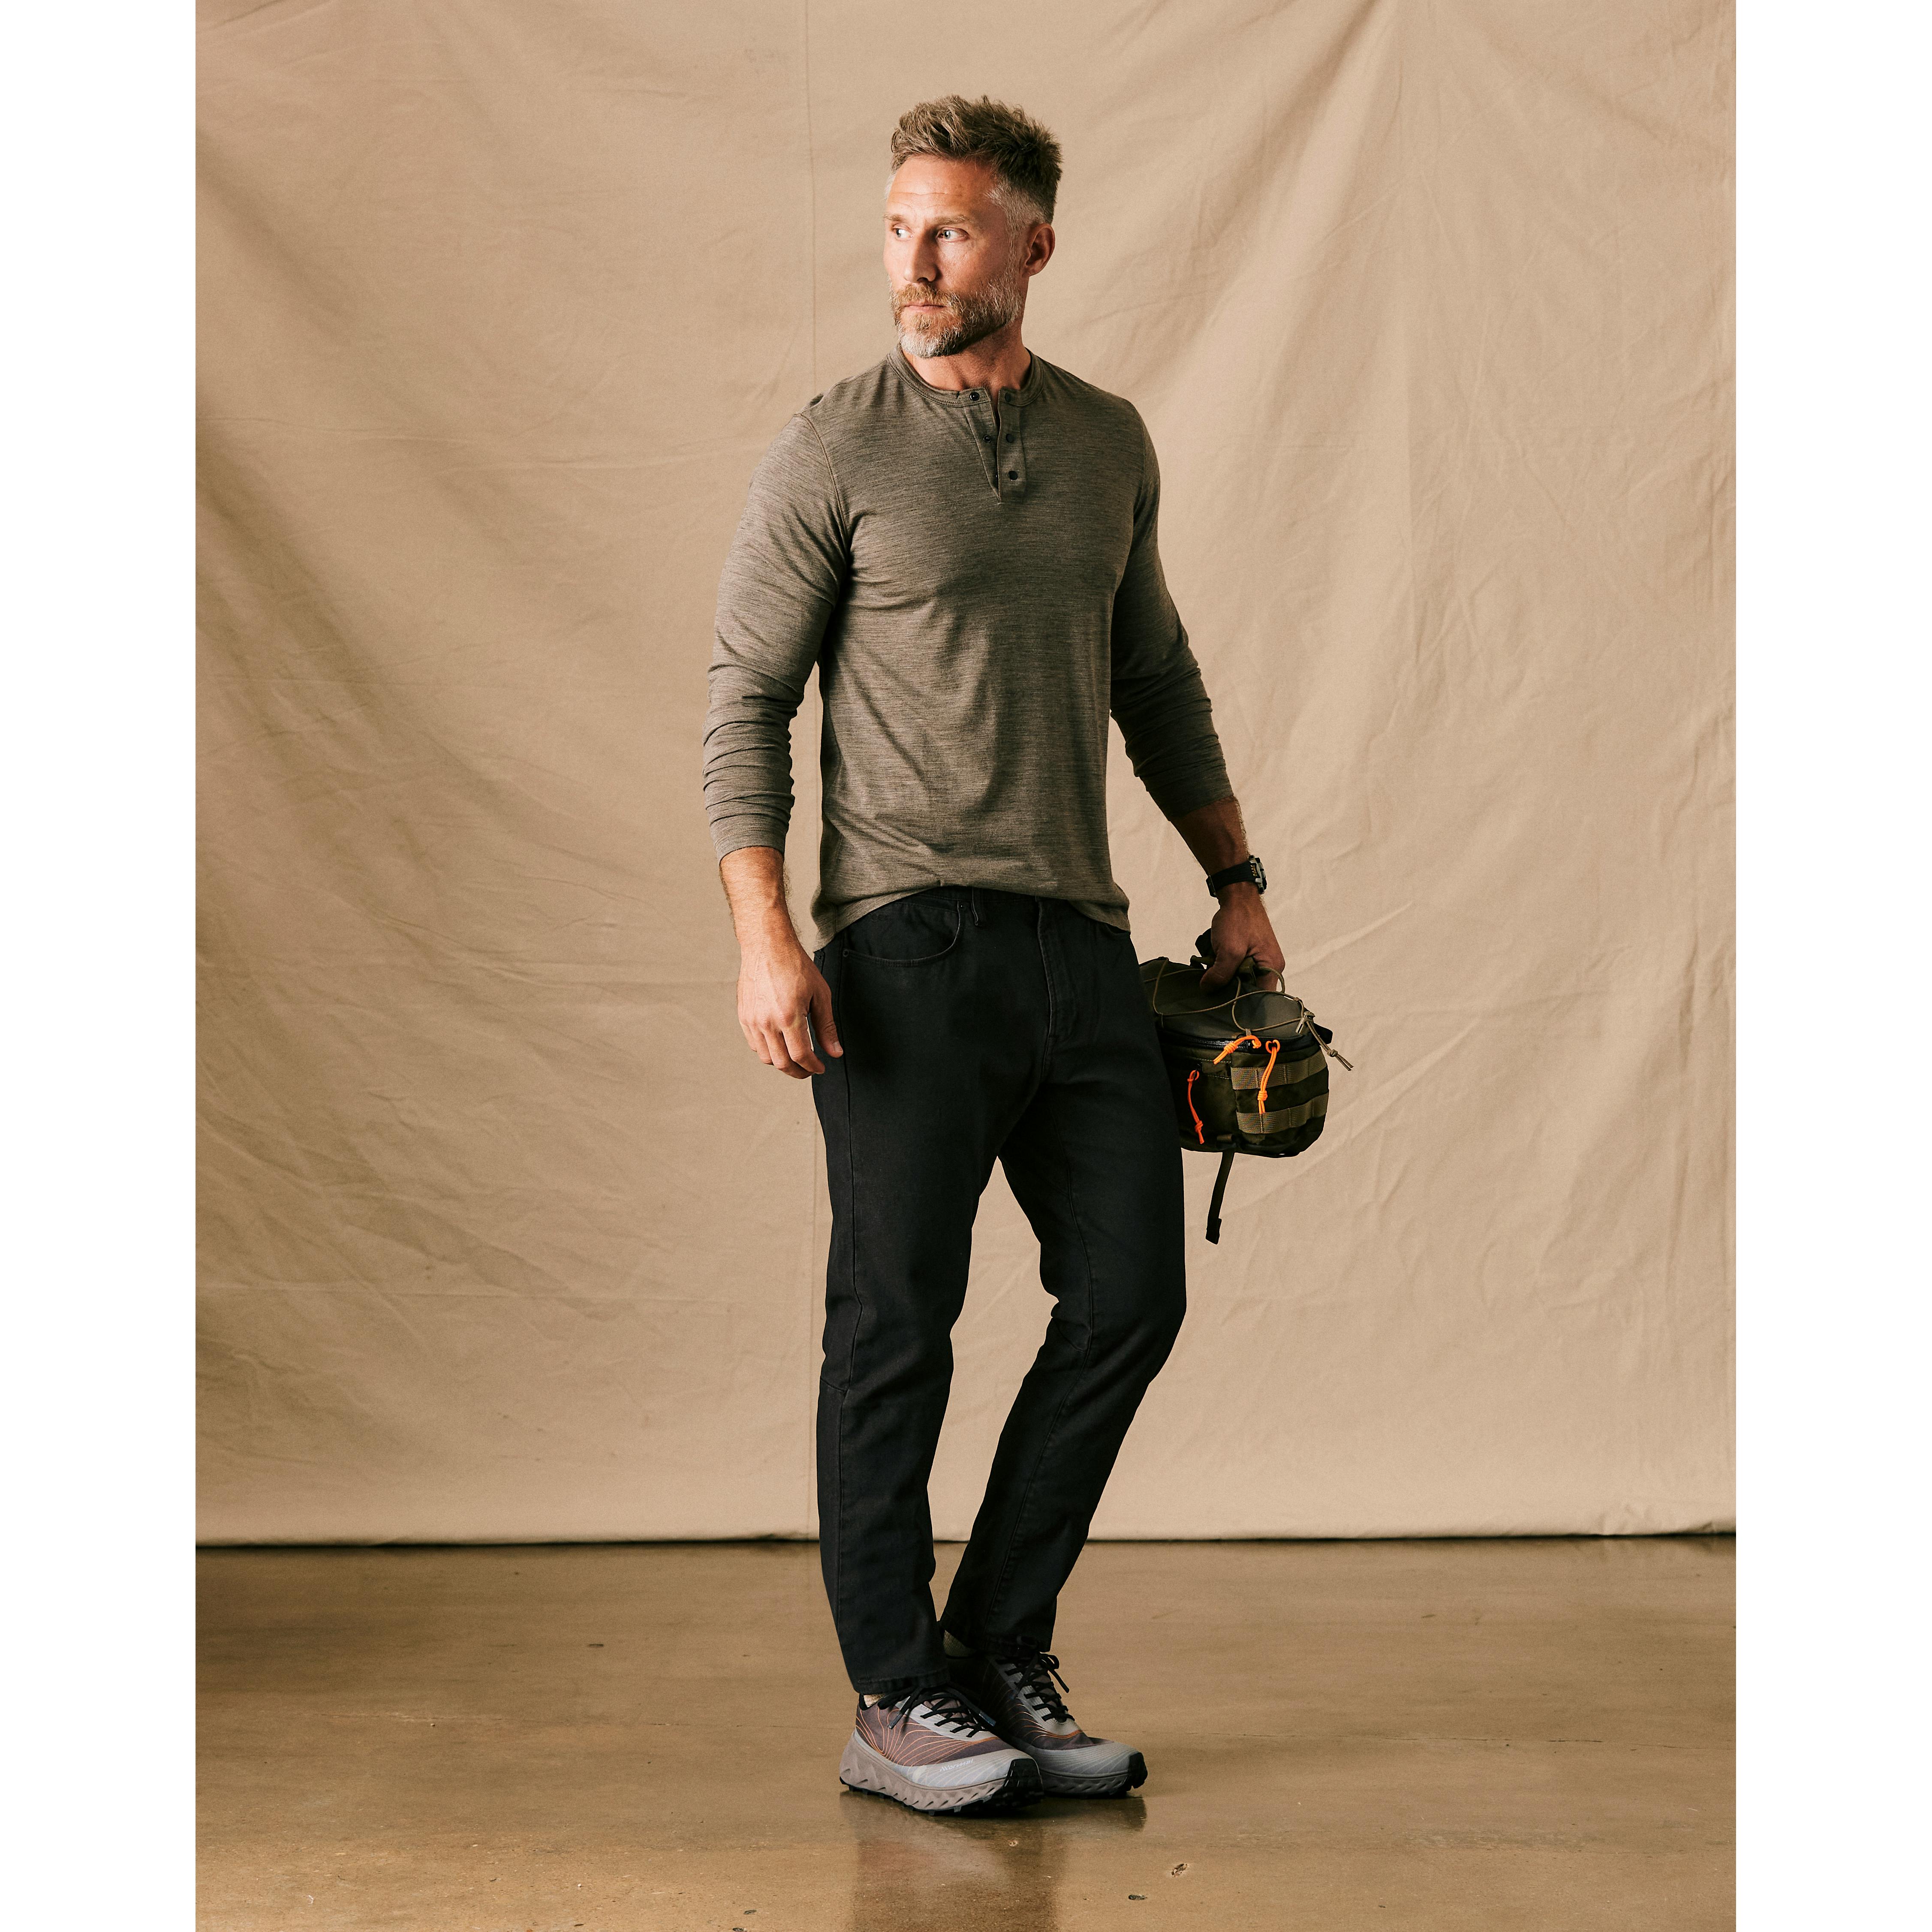 https://huckberry.imgix.net/spree/products/735242/original/54478_Proof_Rover_Pant_-_Slim_Anthracite_on-fig_02.jpg?auto=format%2C%20compress&crop=top&fit=fill&cs=tinysrgb&ar=4%3A5&fill=solid&fill-color=FFFFFF&ixlib=react-9.8.1